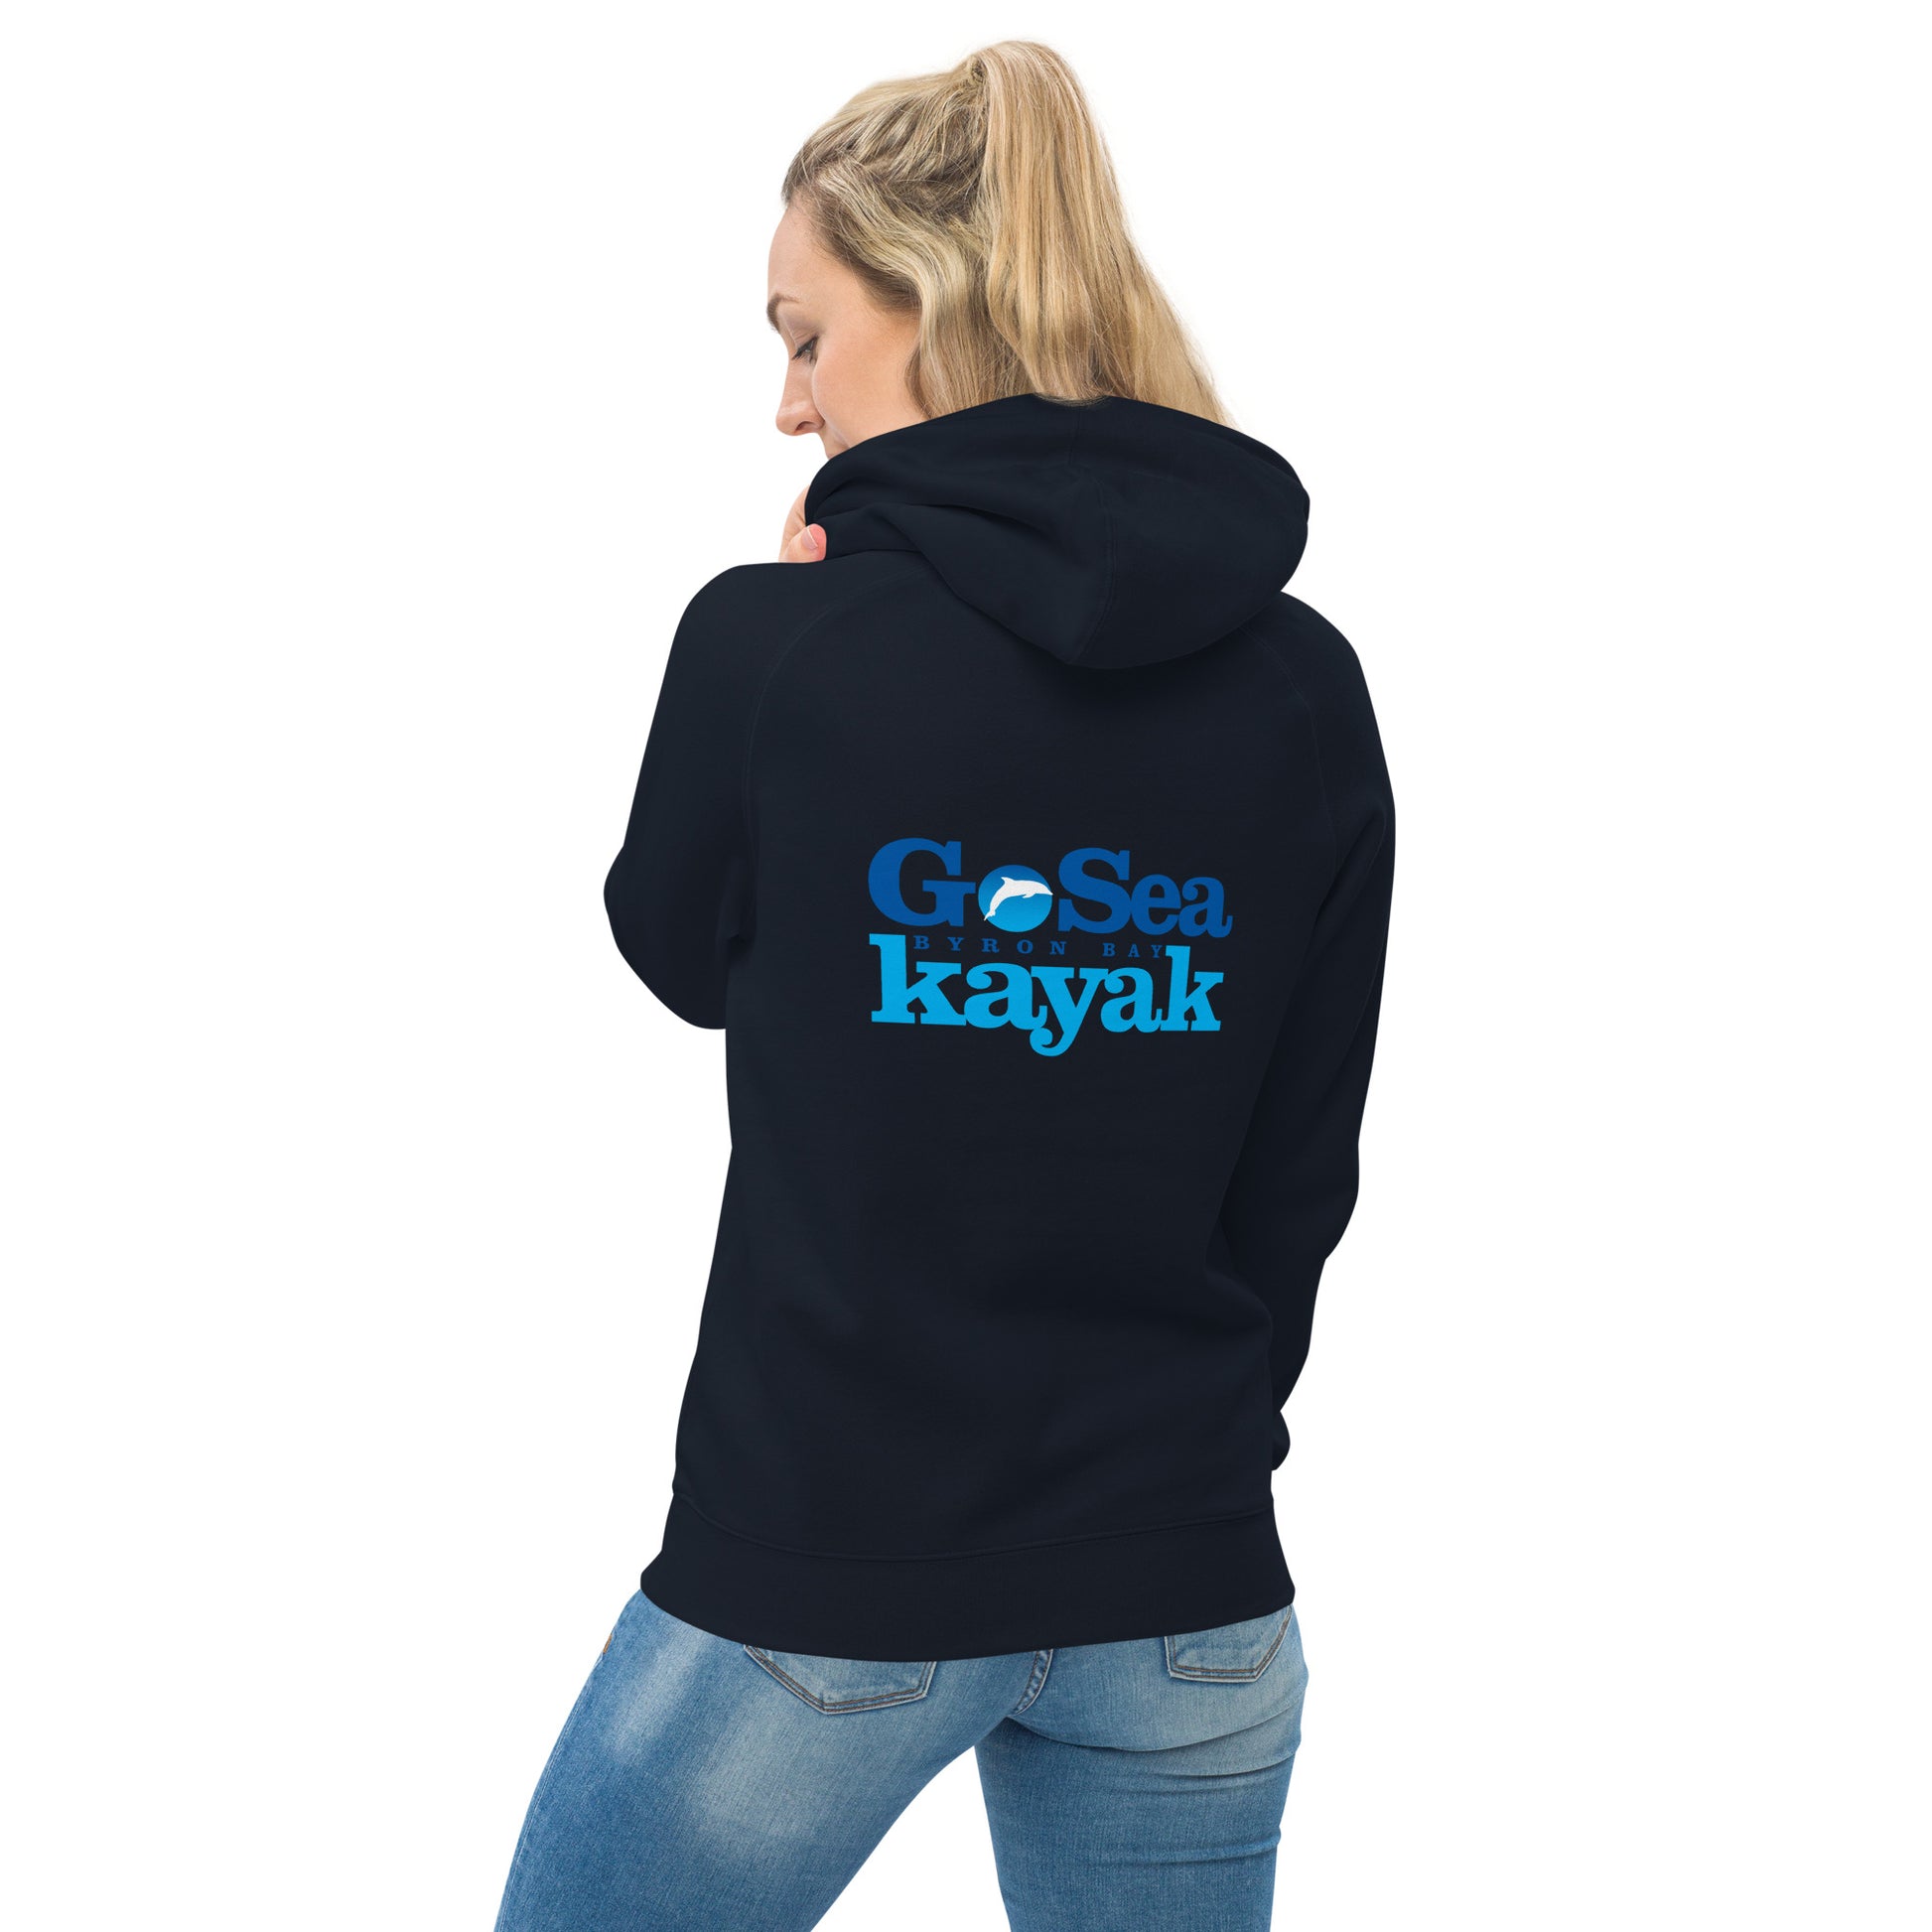  Unisex Hoodie - Navy - Back view being warn by woman  - Go Sea Kayak Byron Bay logo on back and front, Kangaroo pocket on front - Genuine Byron Bay Merchandise | Produced by Go Sea Kayak Byron Bay 